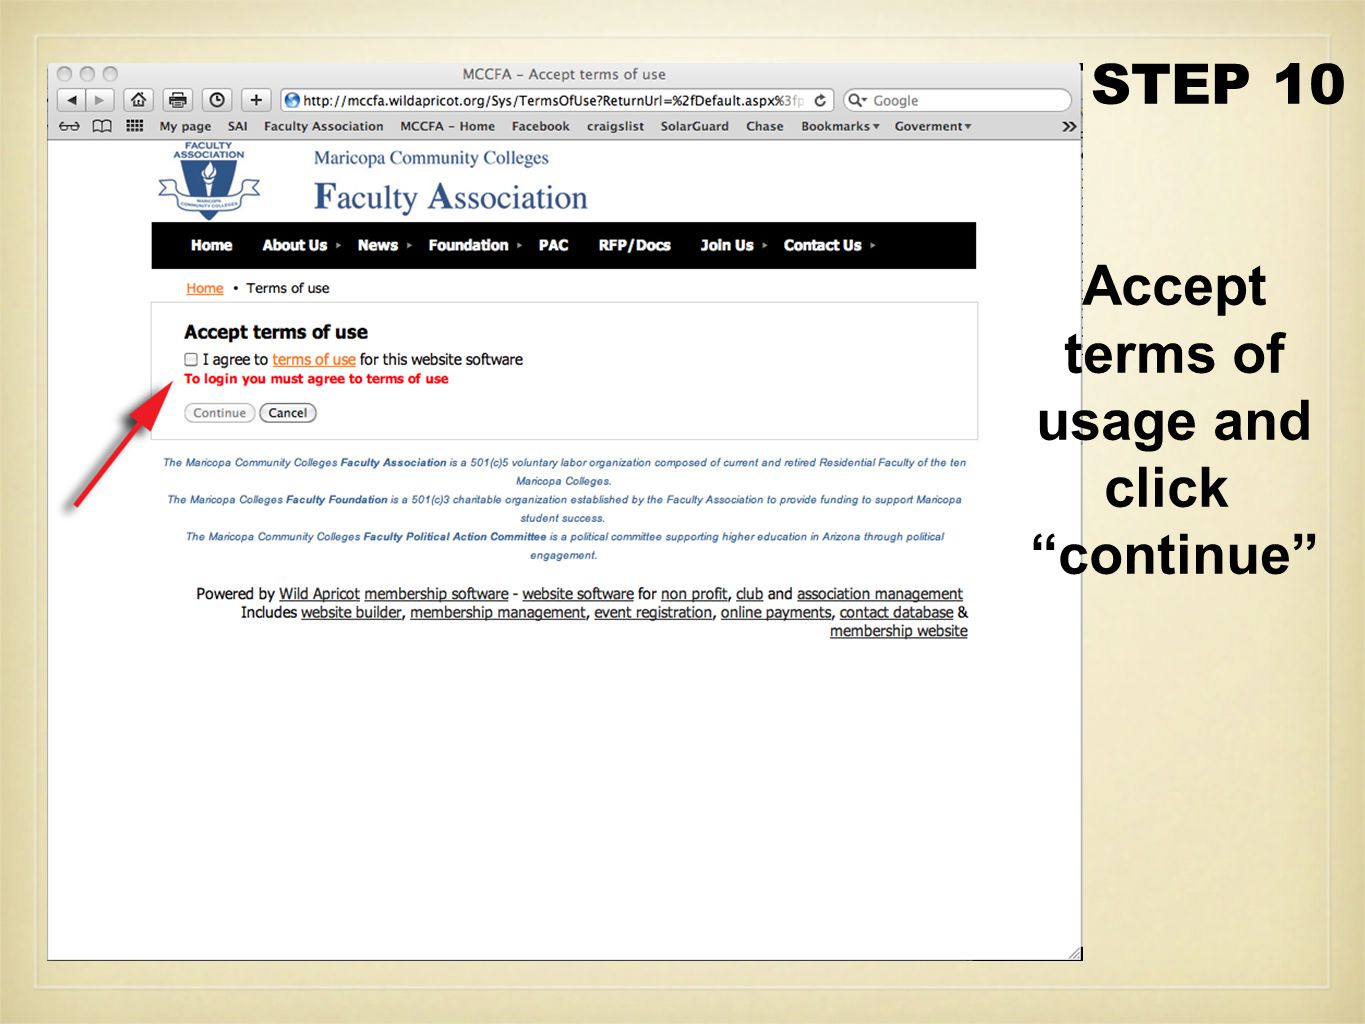 Accept terms of usage and click continue STEP 10